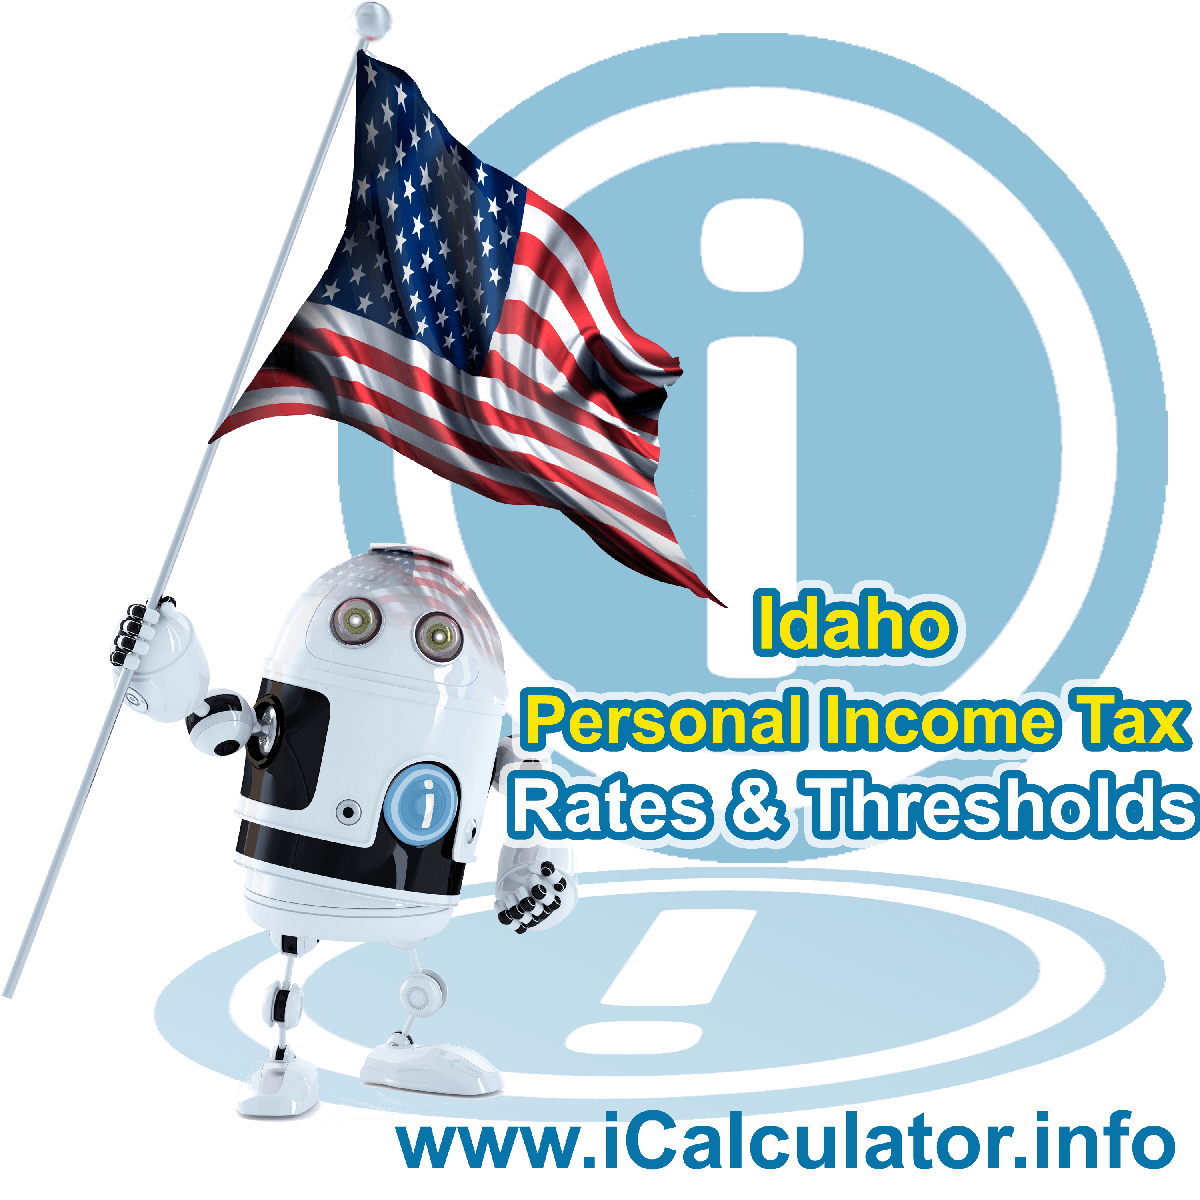 Idaho State Tax Tables 2018. This image displays details of the Idaho State Tax Tables for the 2018 tax return year which is provided in support of the 2018 US Tax Calculator